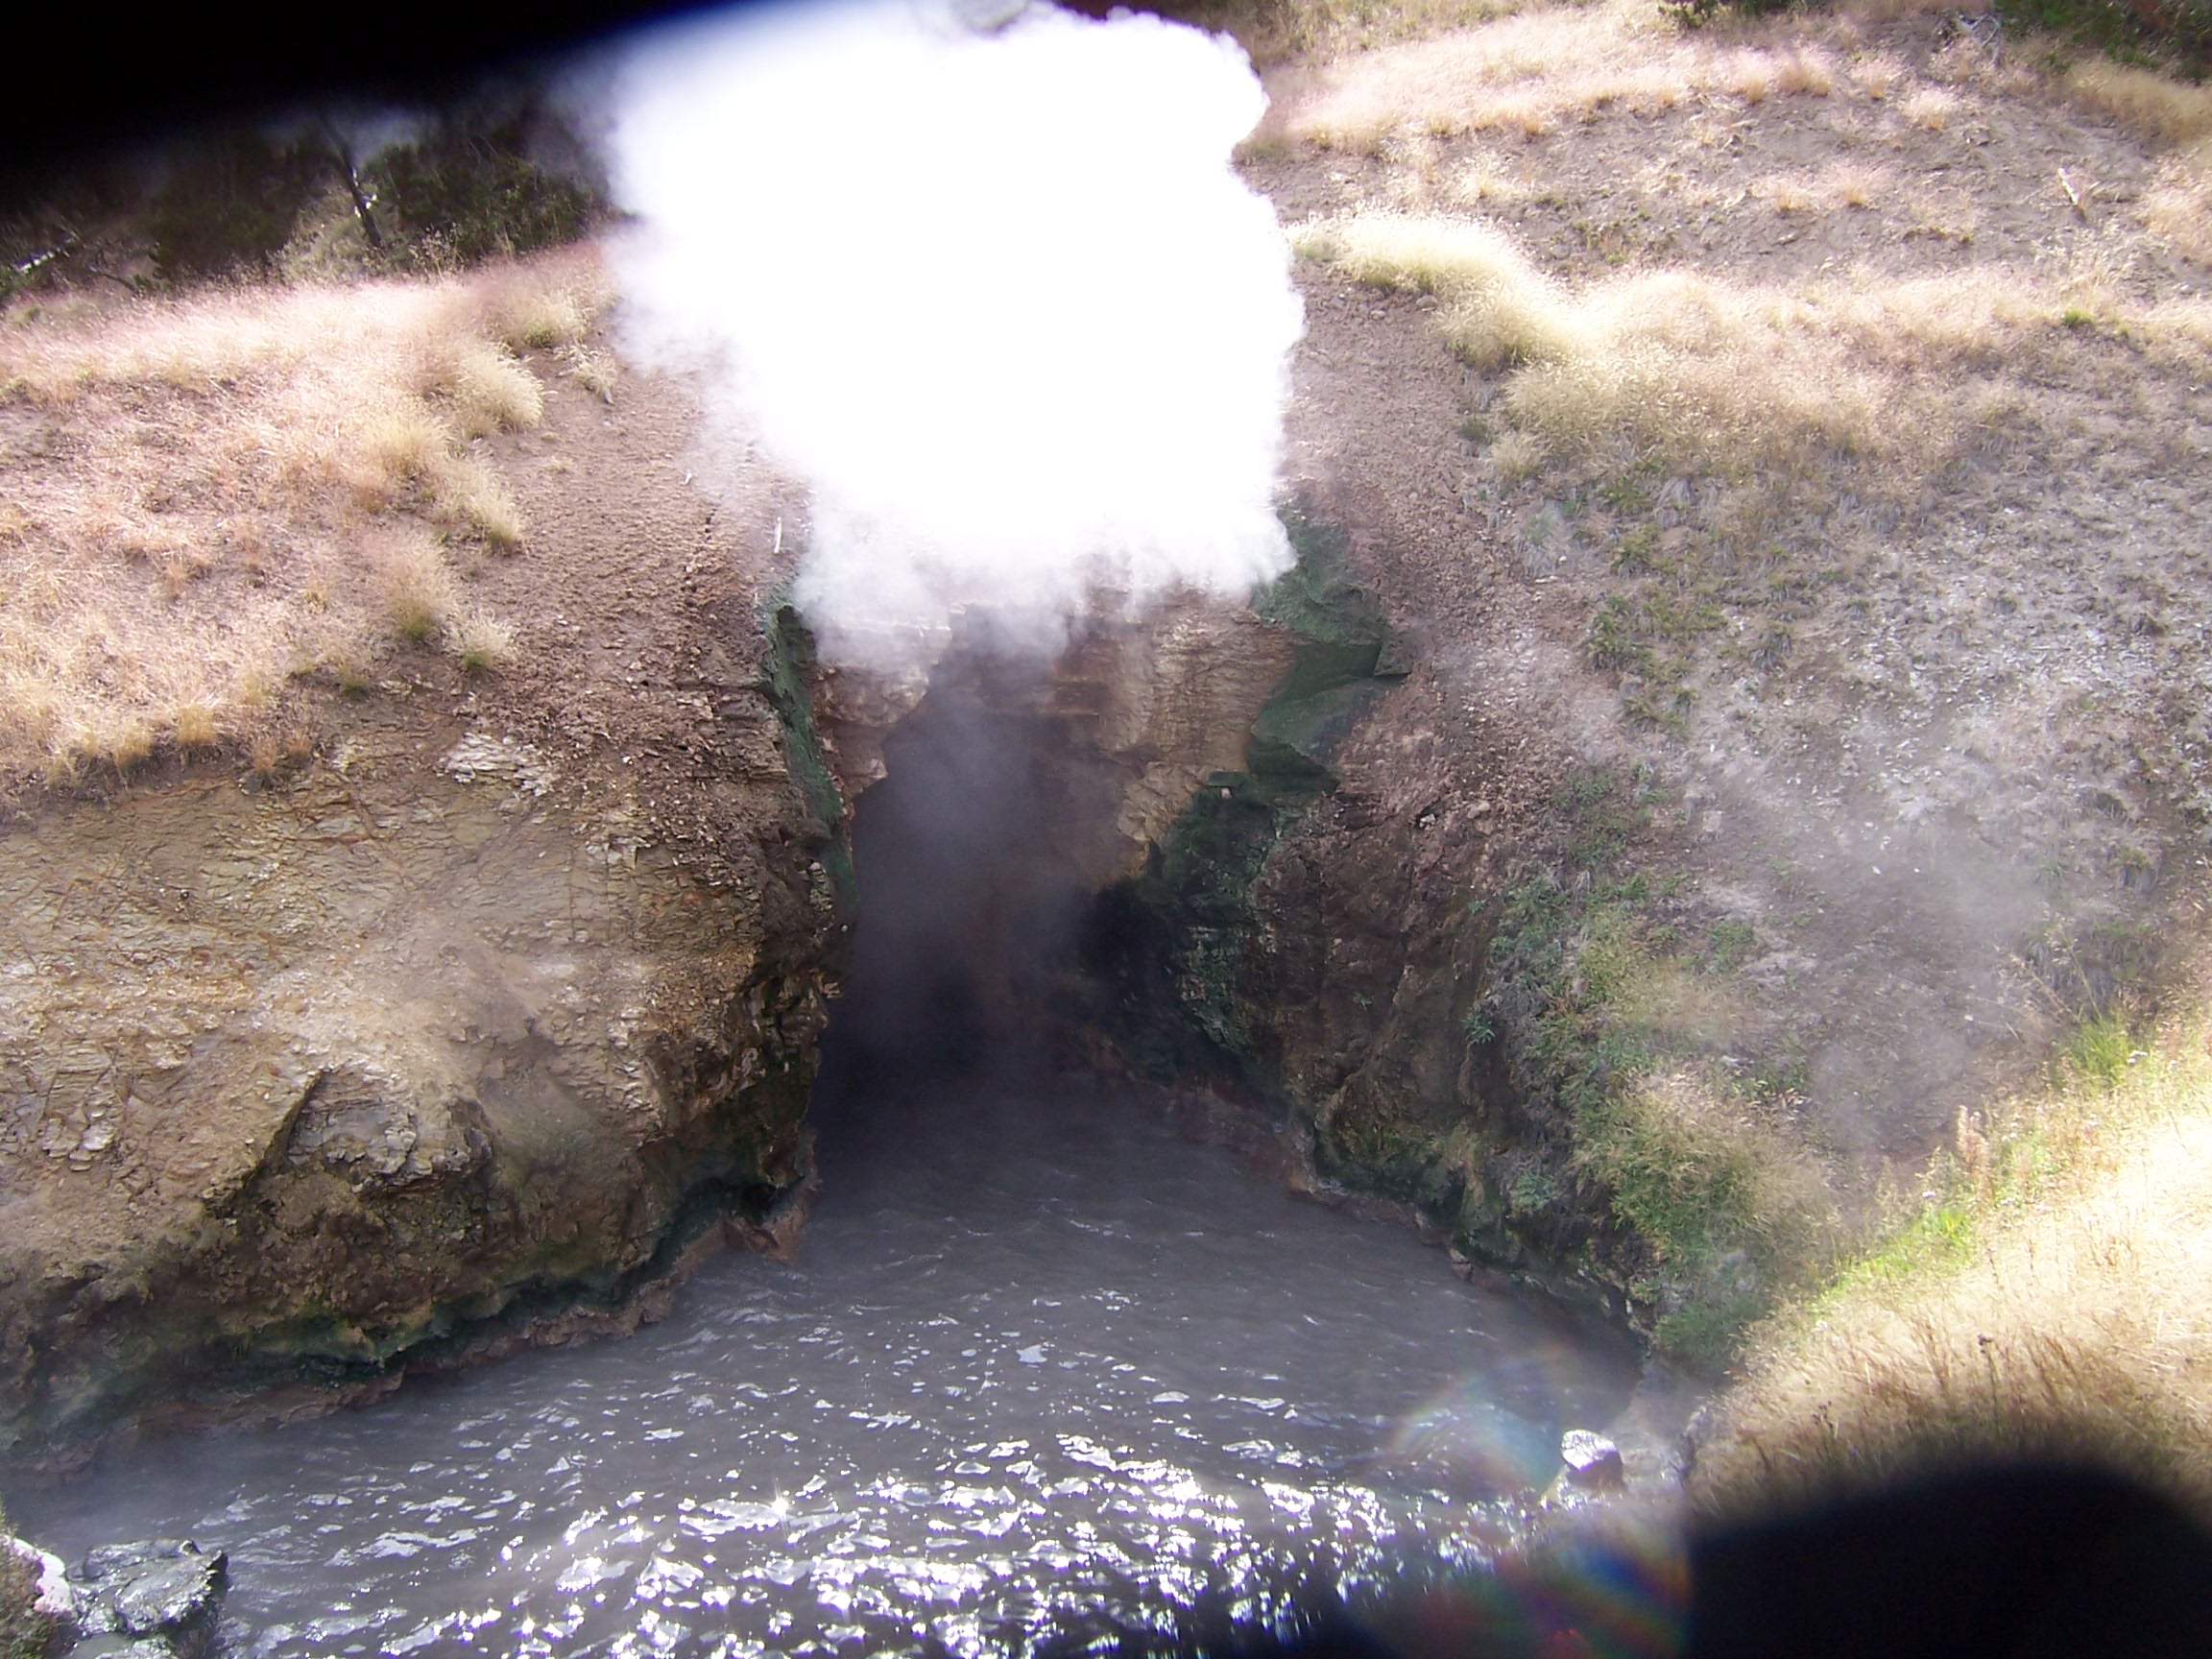 Dragons mouth, a hot spring.